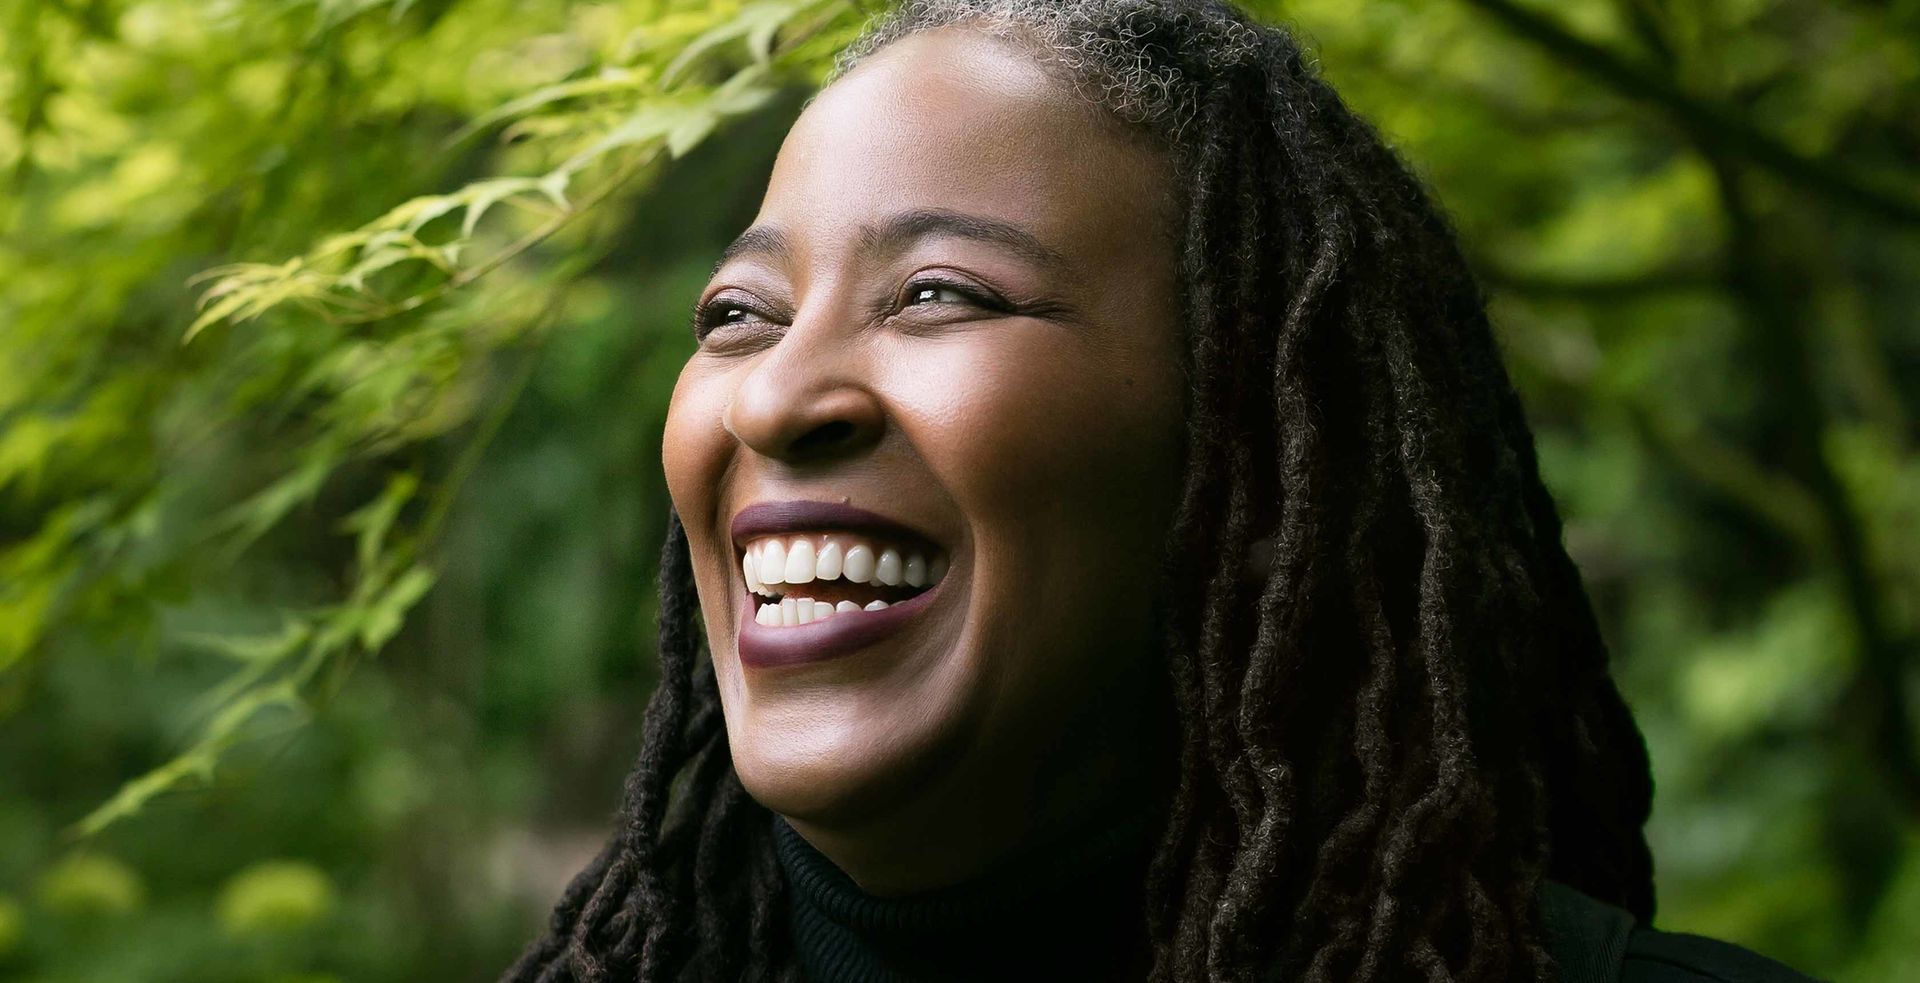 Poet Camille Dungy, a Black woman with long dreadlocks wearing a black turtleneck, laughing and standing among trees